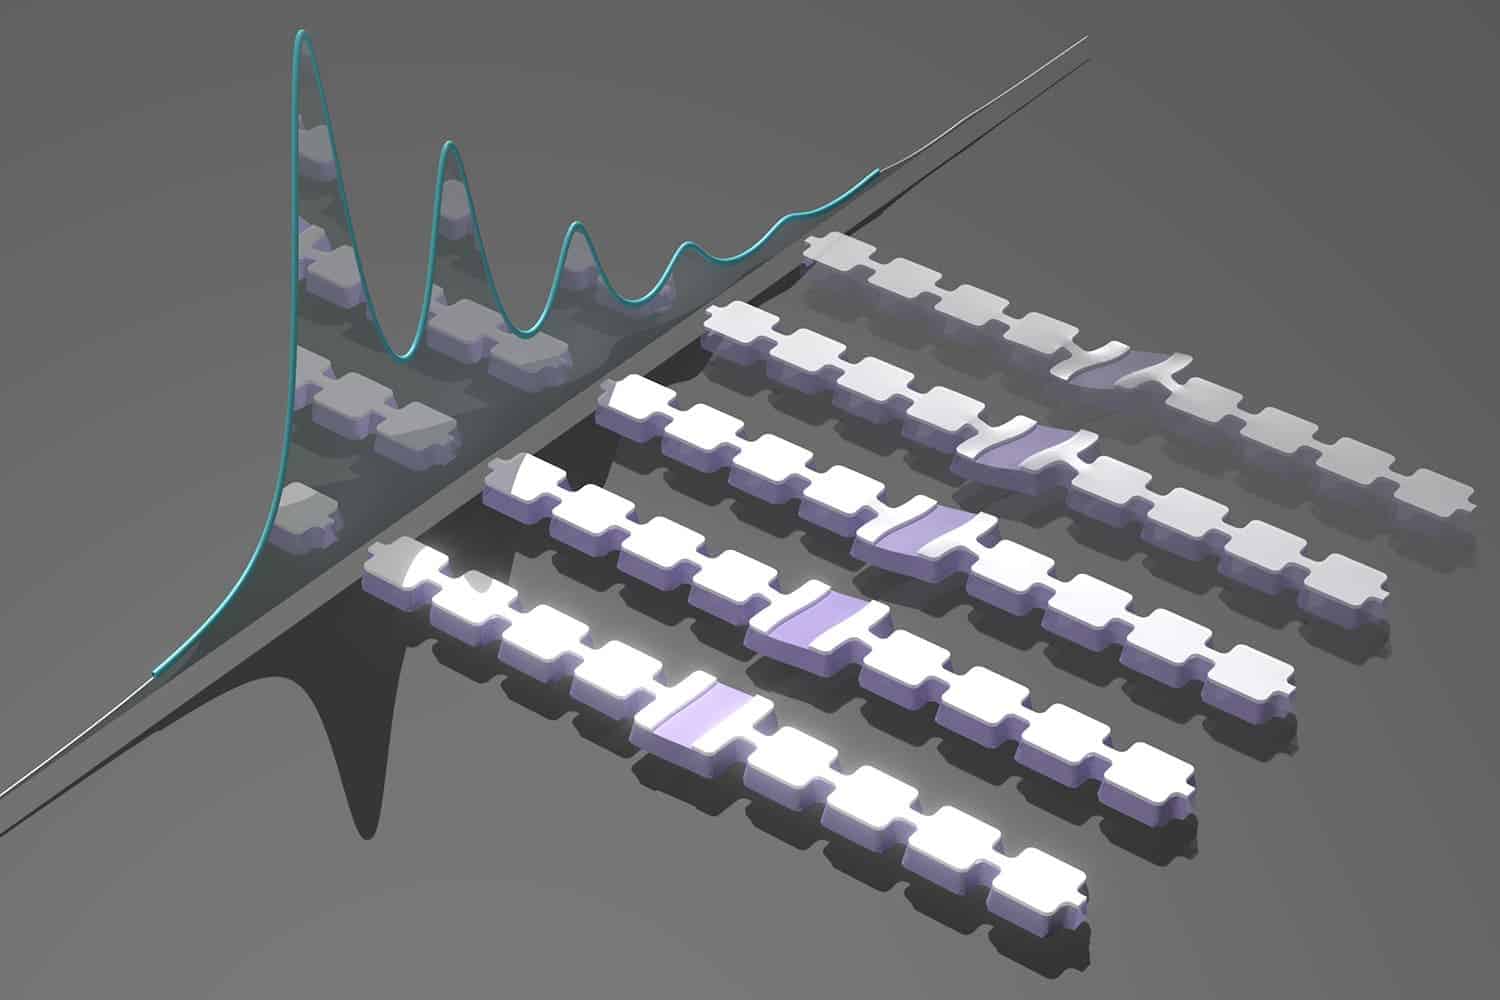 Artist's impression of an array of nanomechanical resonators designed to generate and trap sound particles, or phonons. The mechanical motions of the trapped phonons are sensed by a qubit detector, which shifts its frequency depending on the number of phonons in a resonator. Different phonon numbers are visible as distinct peaks in the qubit spectrum, which are shown schematically behind the resonators. (Wentao Jiang)